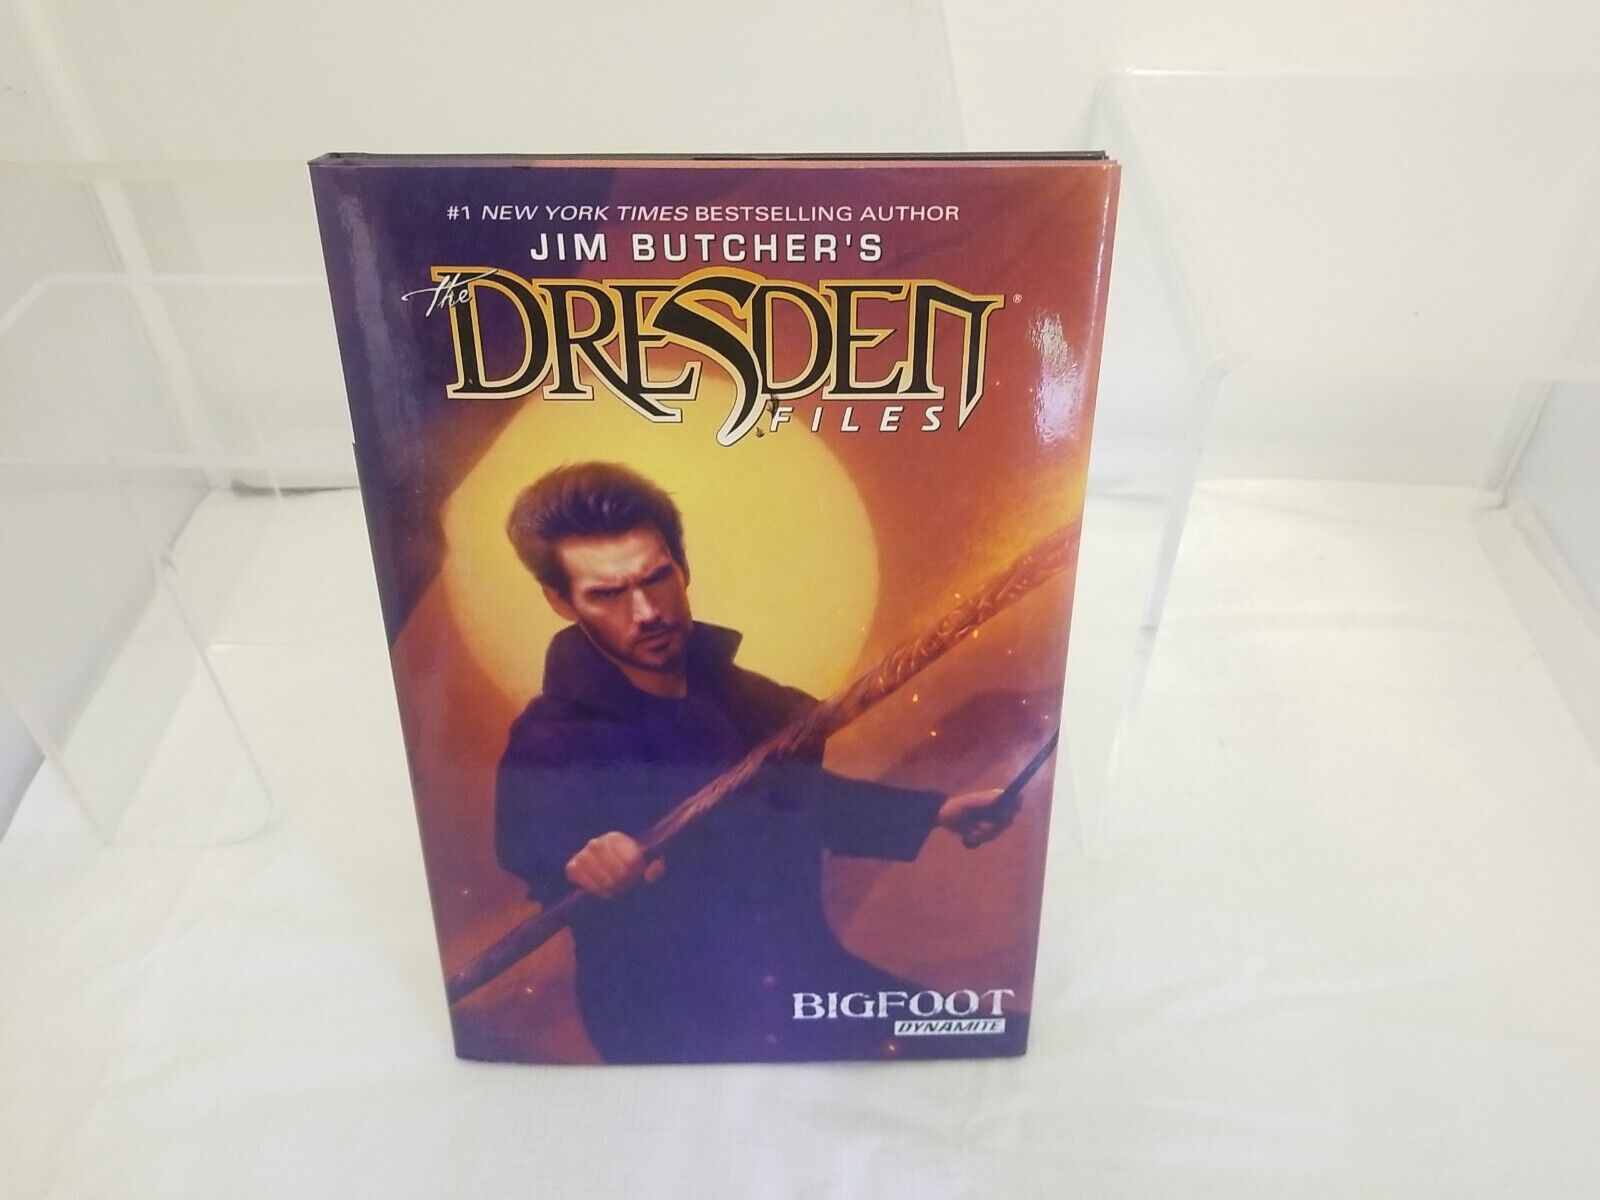 Jim Butcher’s Dresden Files: Bigfoot Hardcover by Jim Butcher, SEE PICTURES